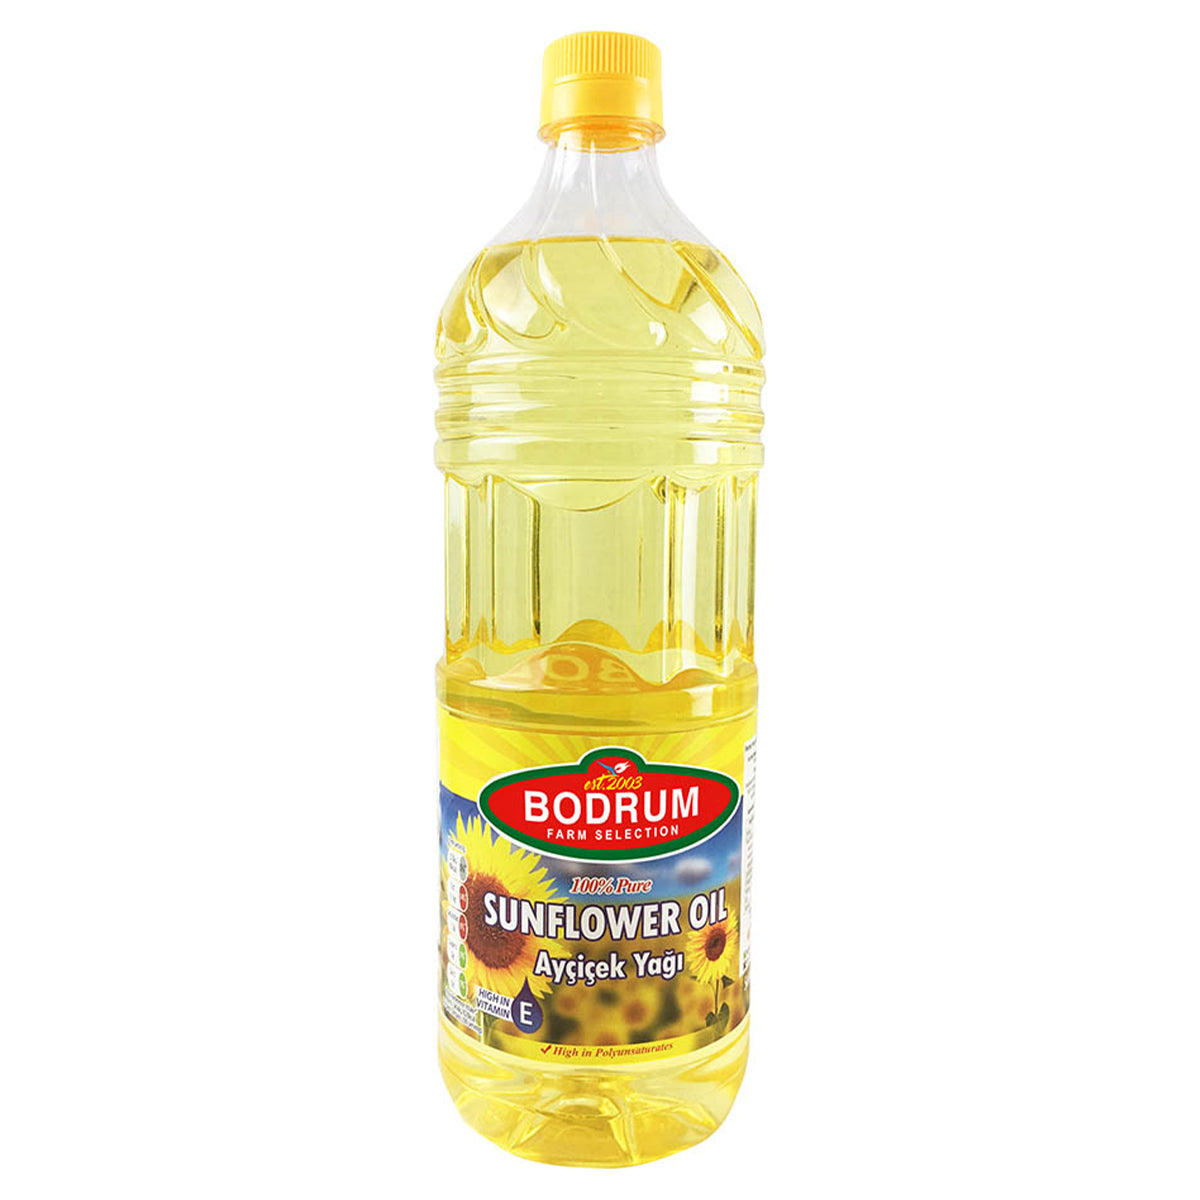 A bottle of Bodrum - Sunflower Oil - 1L on a white background.